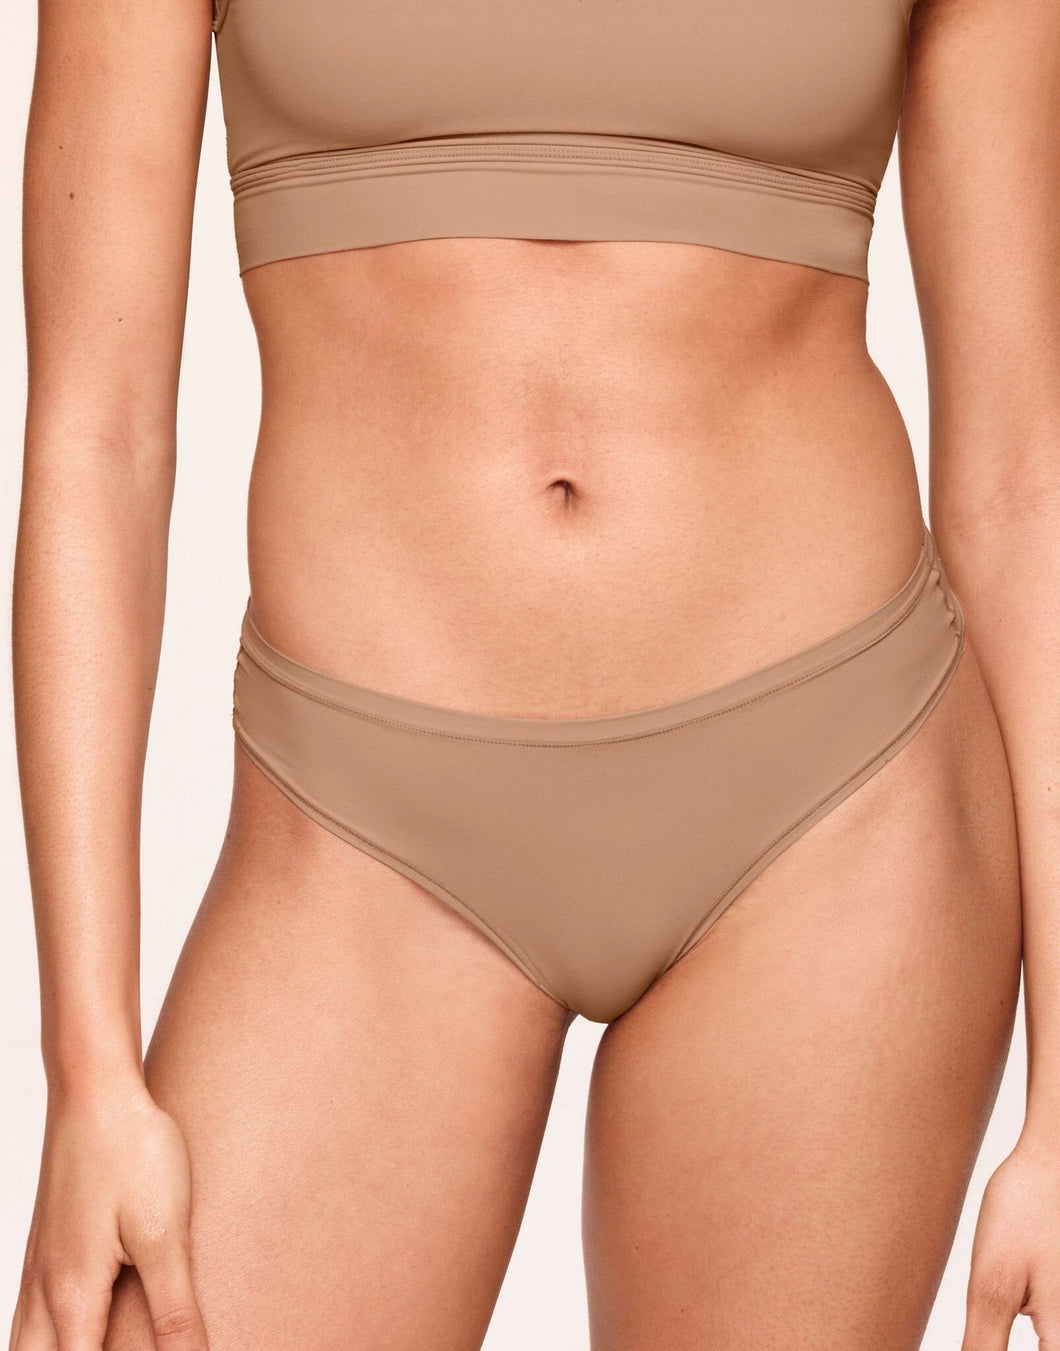 nueskin Mora in color Macaroon and shape thong